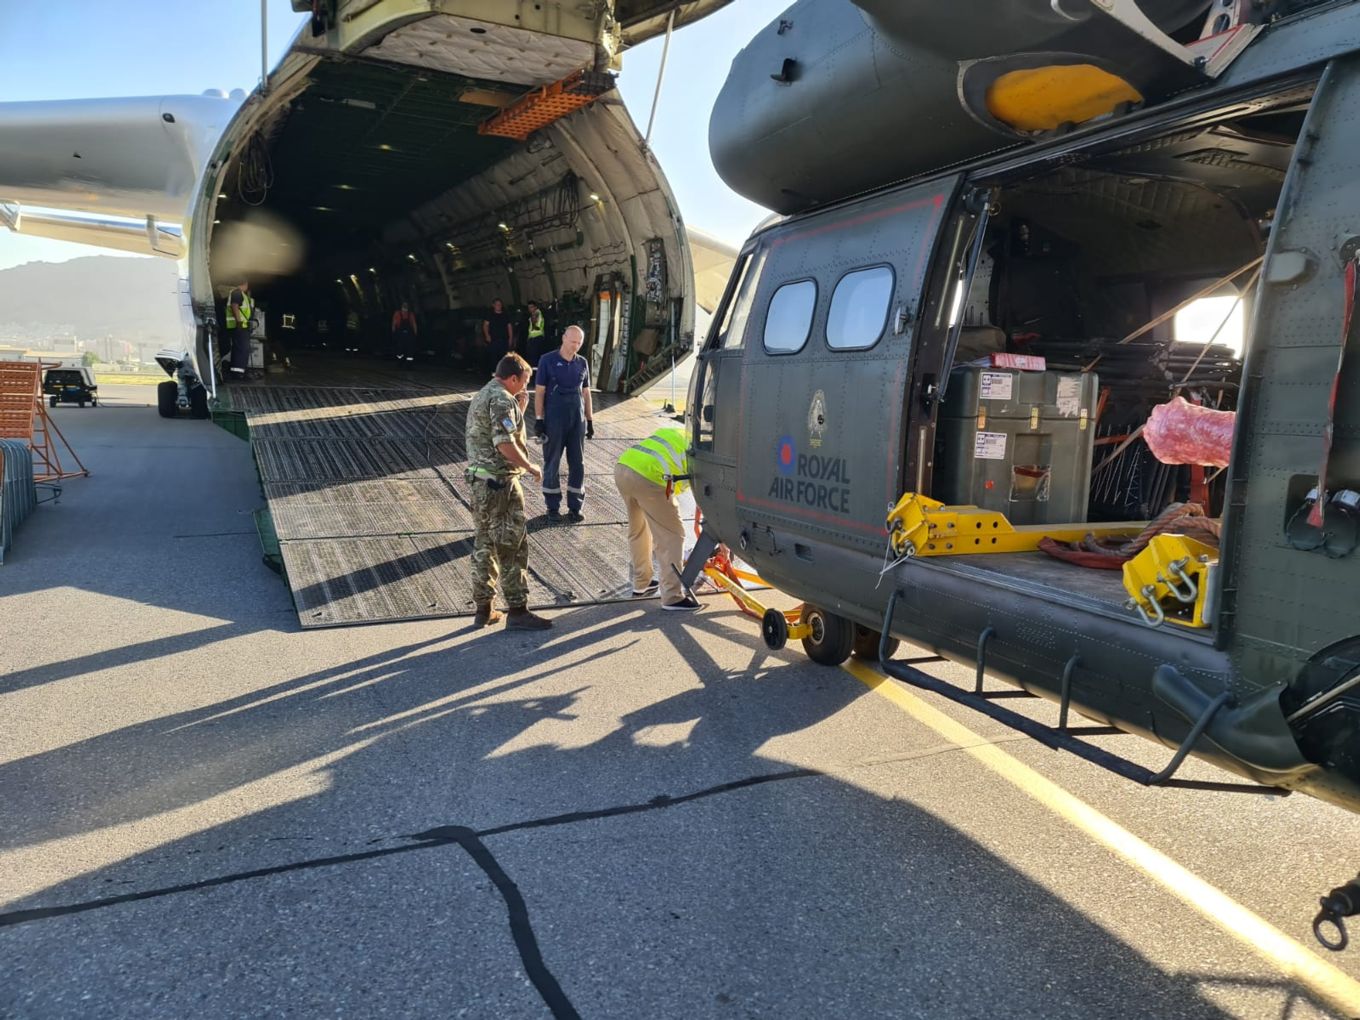  Royal Air Force engineers worked alongside the Movers and AN-225 crew to safely load the helicopters into the back of the Antonov for onward transport to RAF Brize Norton in the UK.  